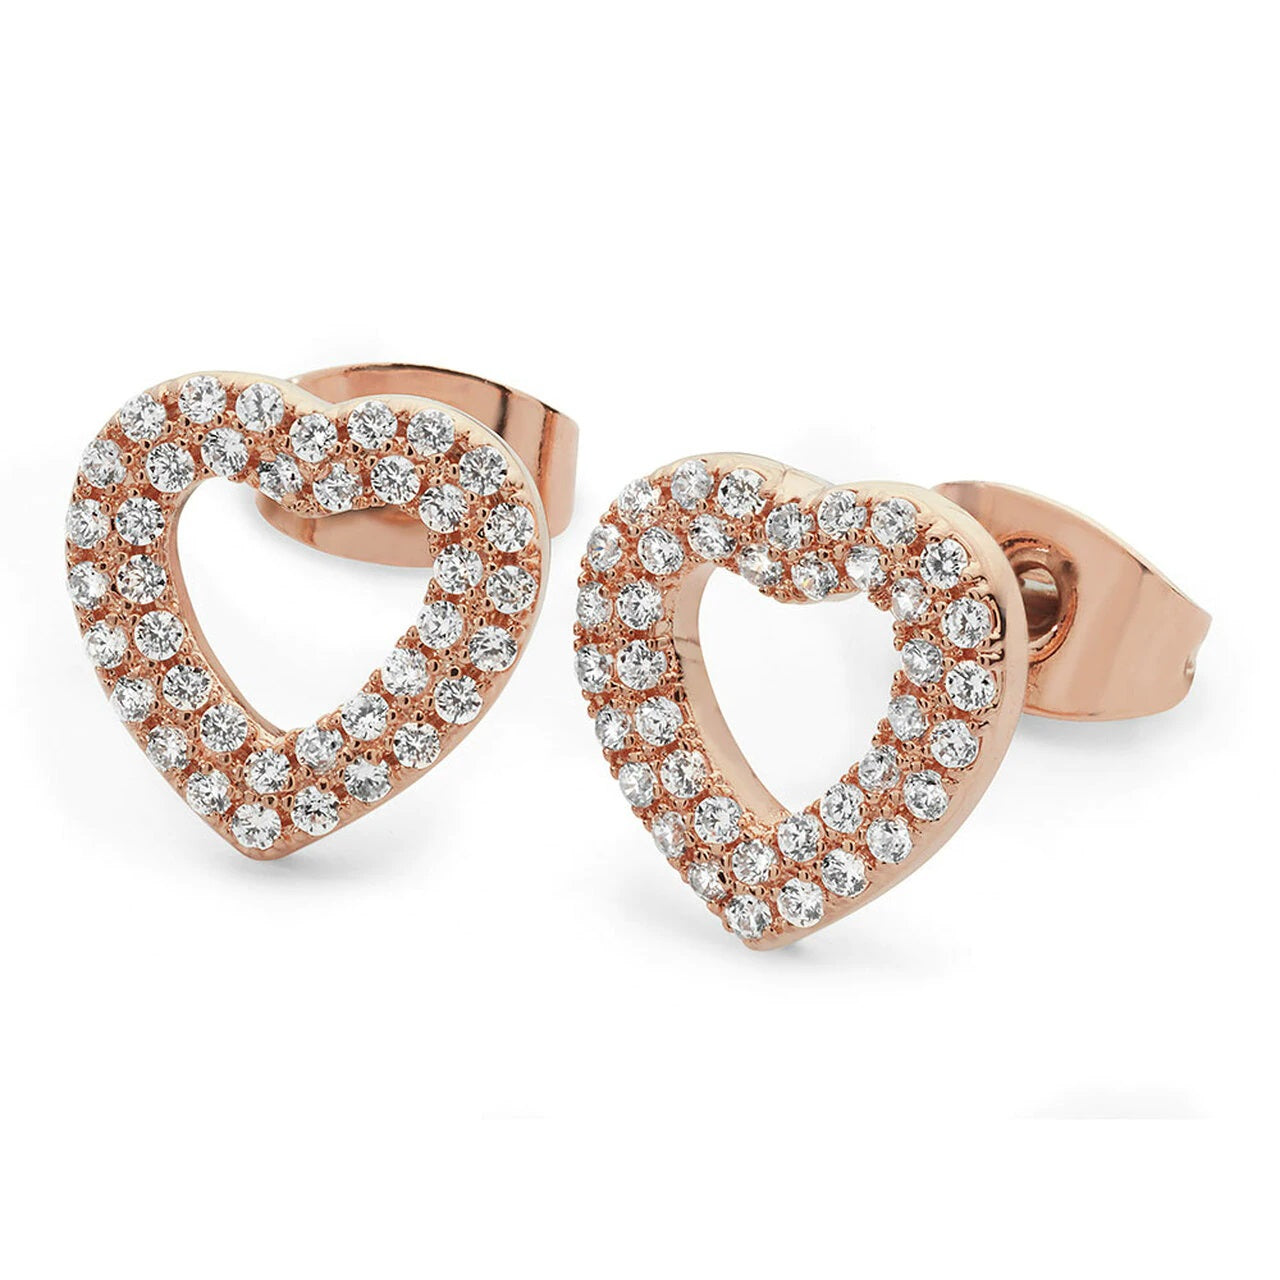 Double Pave Heart Earrings Rose Gold by Tipperary  Simple yet elegantly dazzling these clear stone open heart shaped stud earrings are the perfect partner to our double pavé pendant.